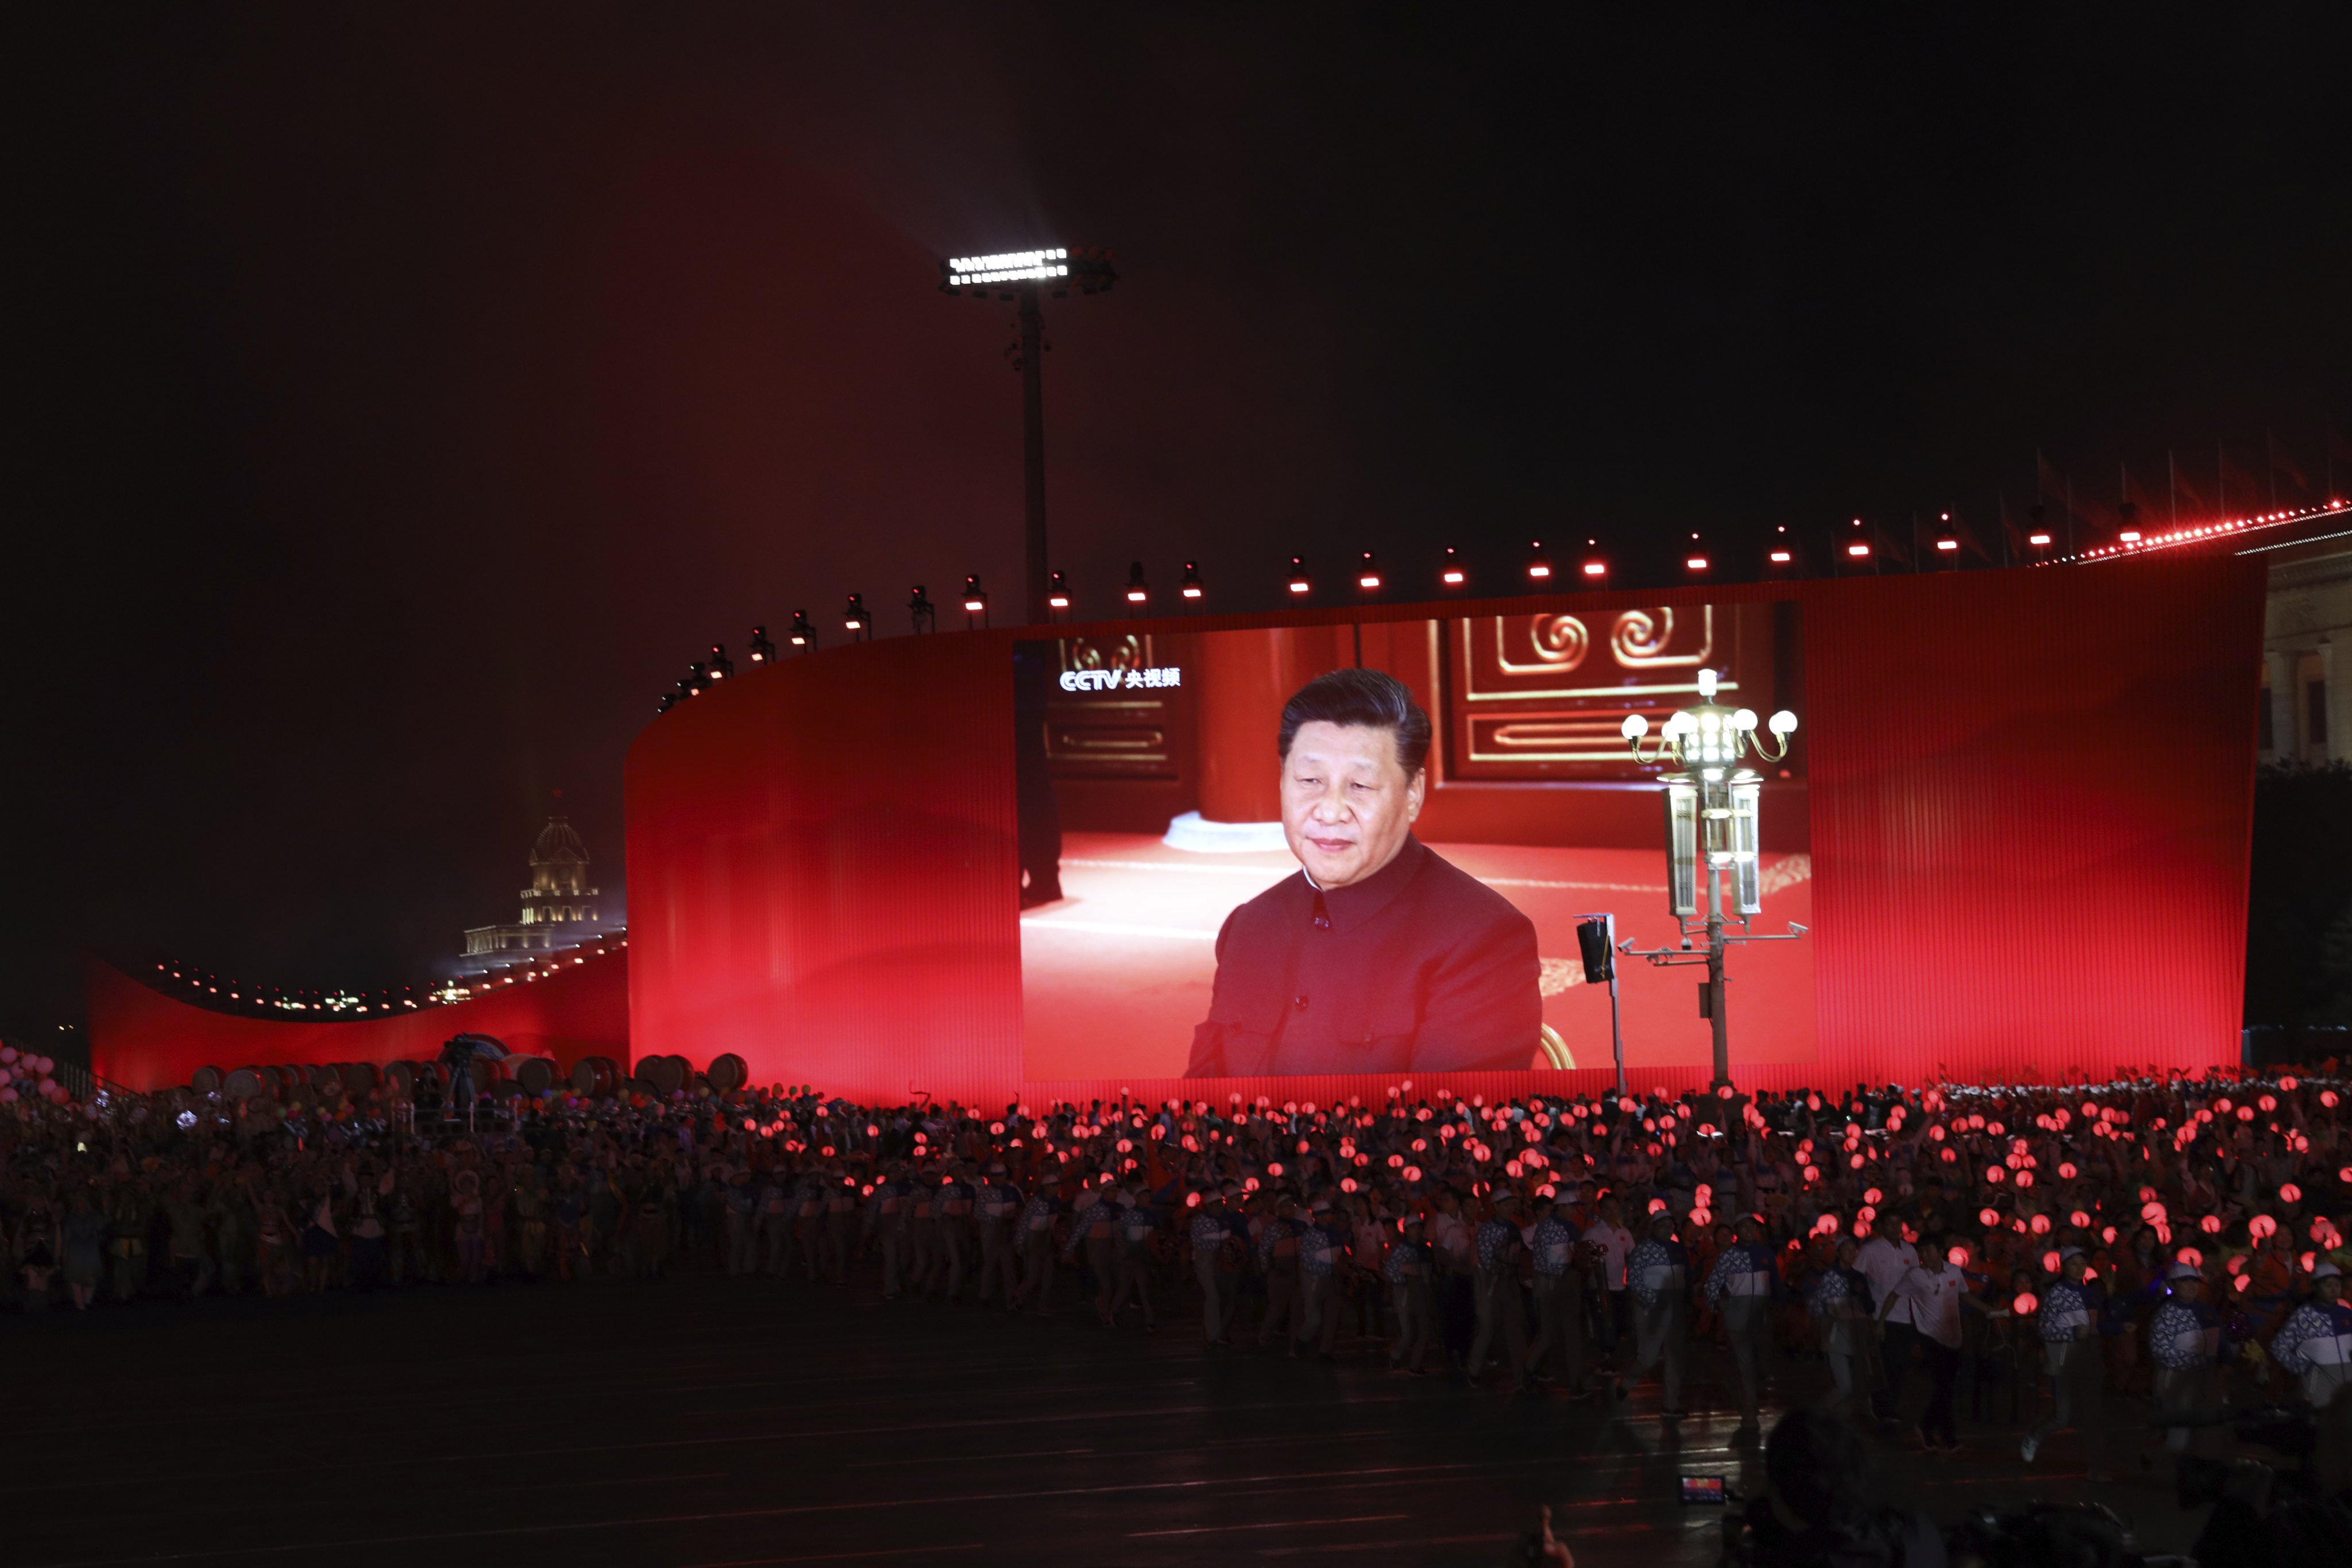 Since Xi Jinping became China’s top leader in late 2012, he has strengthened ideological controls at all levels of society. Photo: AP